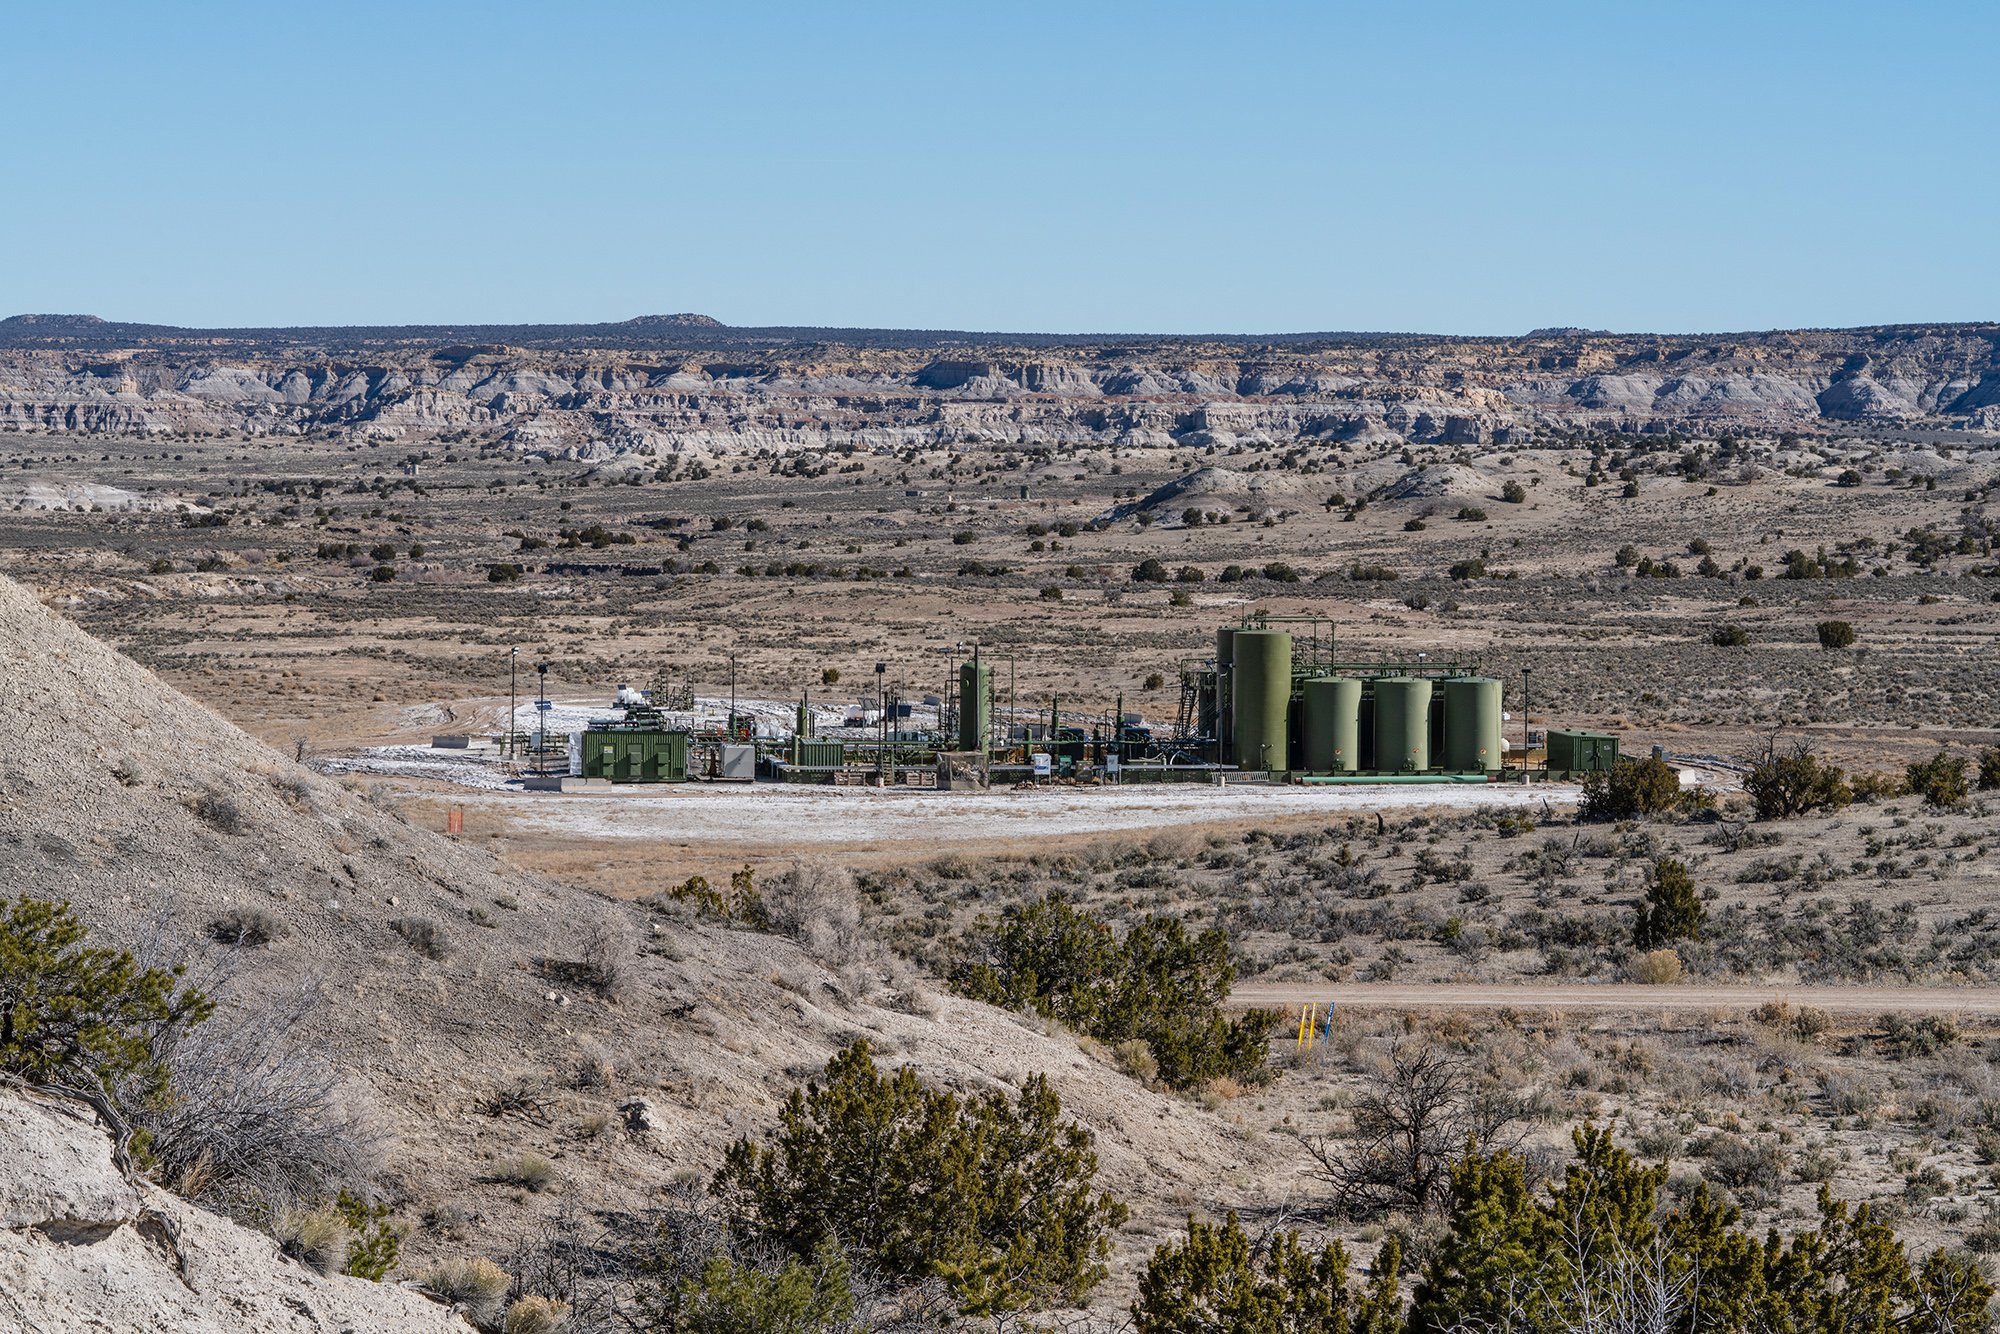 Oil and gas wells in Greater Chaco photographed for the Center for Biological Diversity